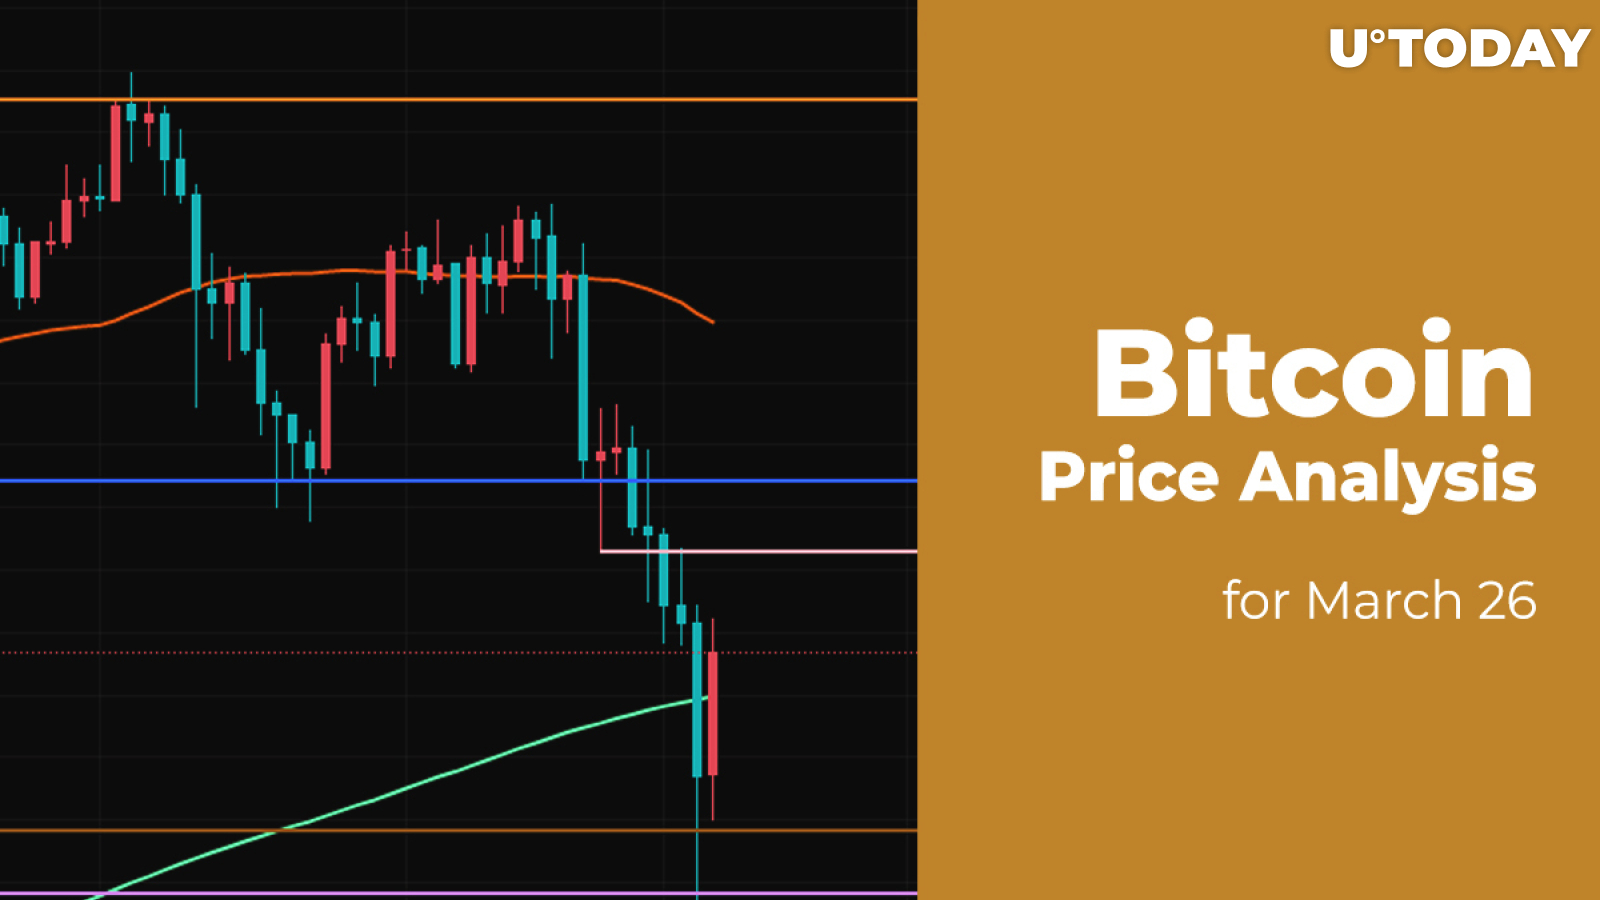 Bitcoin (BTC) Price Analysis for March 26